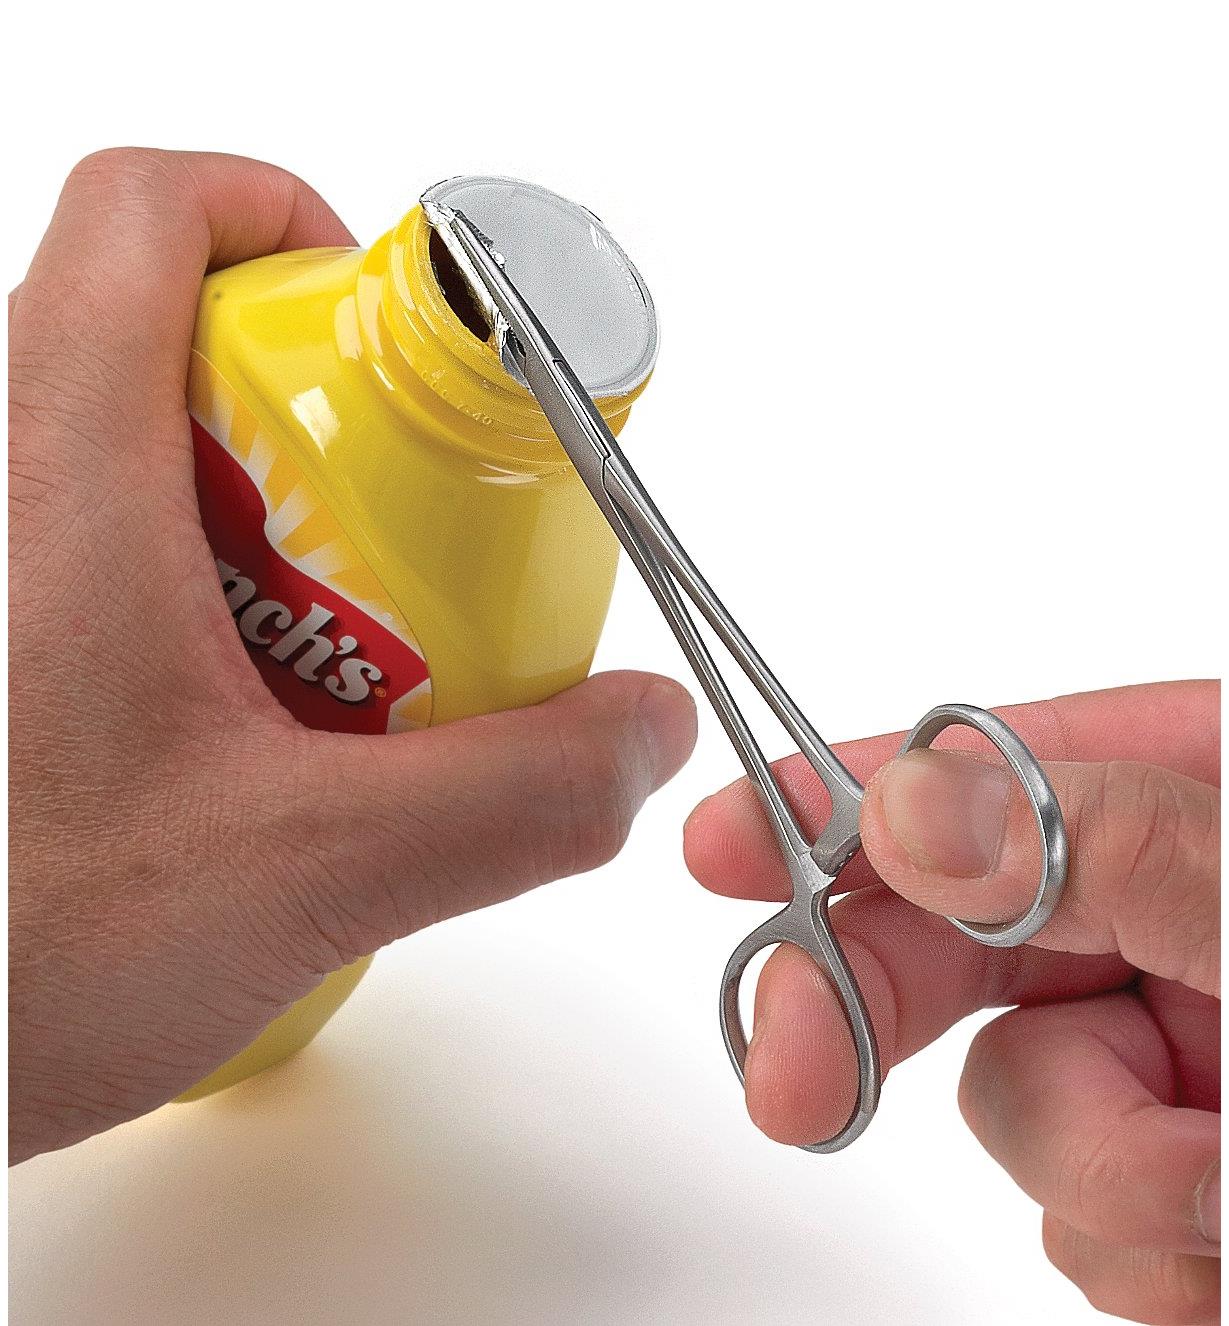 Using seal removal pliers to remove a seal from a mustard container 